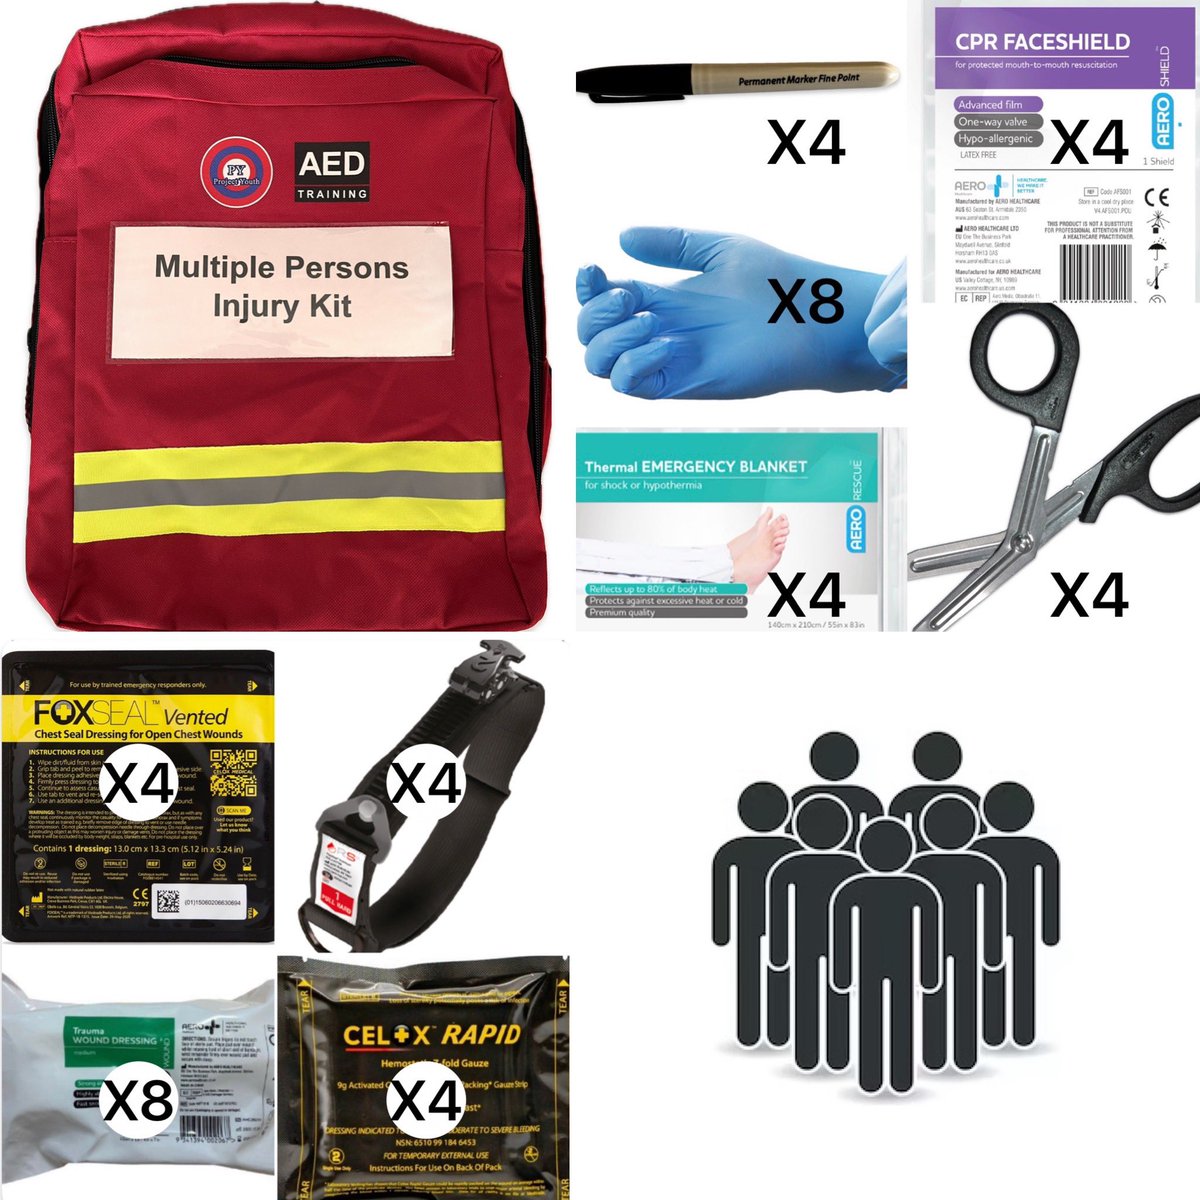 Something BIG is coming and it’s called MPIK!

🩸Multiple Persons Injury Kit 🩸 

4 X RapidStop Tourniquets
4 X Celox Rapid Haemostatic Gauze
4 X Celox FoxSeal Vented Chest Seals
8 X AeroWound Trauma Wound Dressings
8 X Pairs of Gloves
4 X Trauma Shears
4 X CPR FaceShields